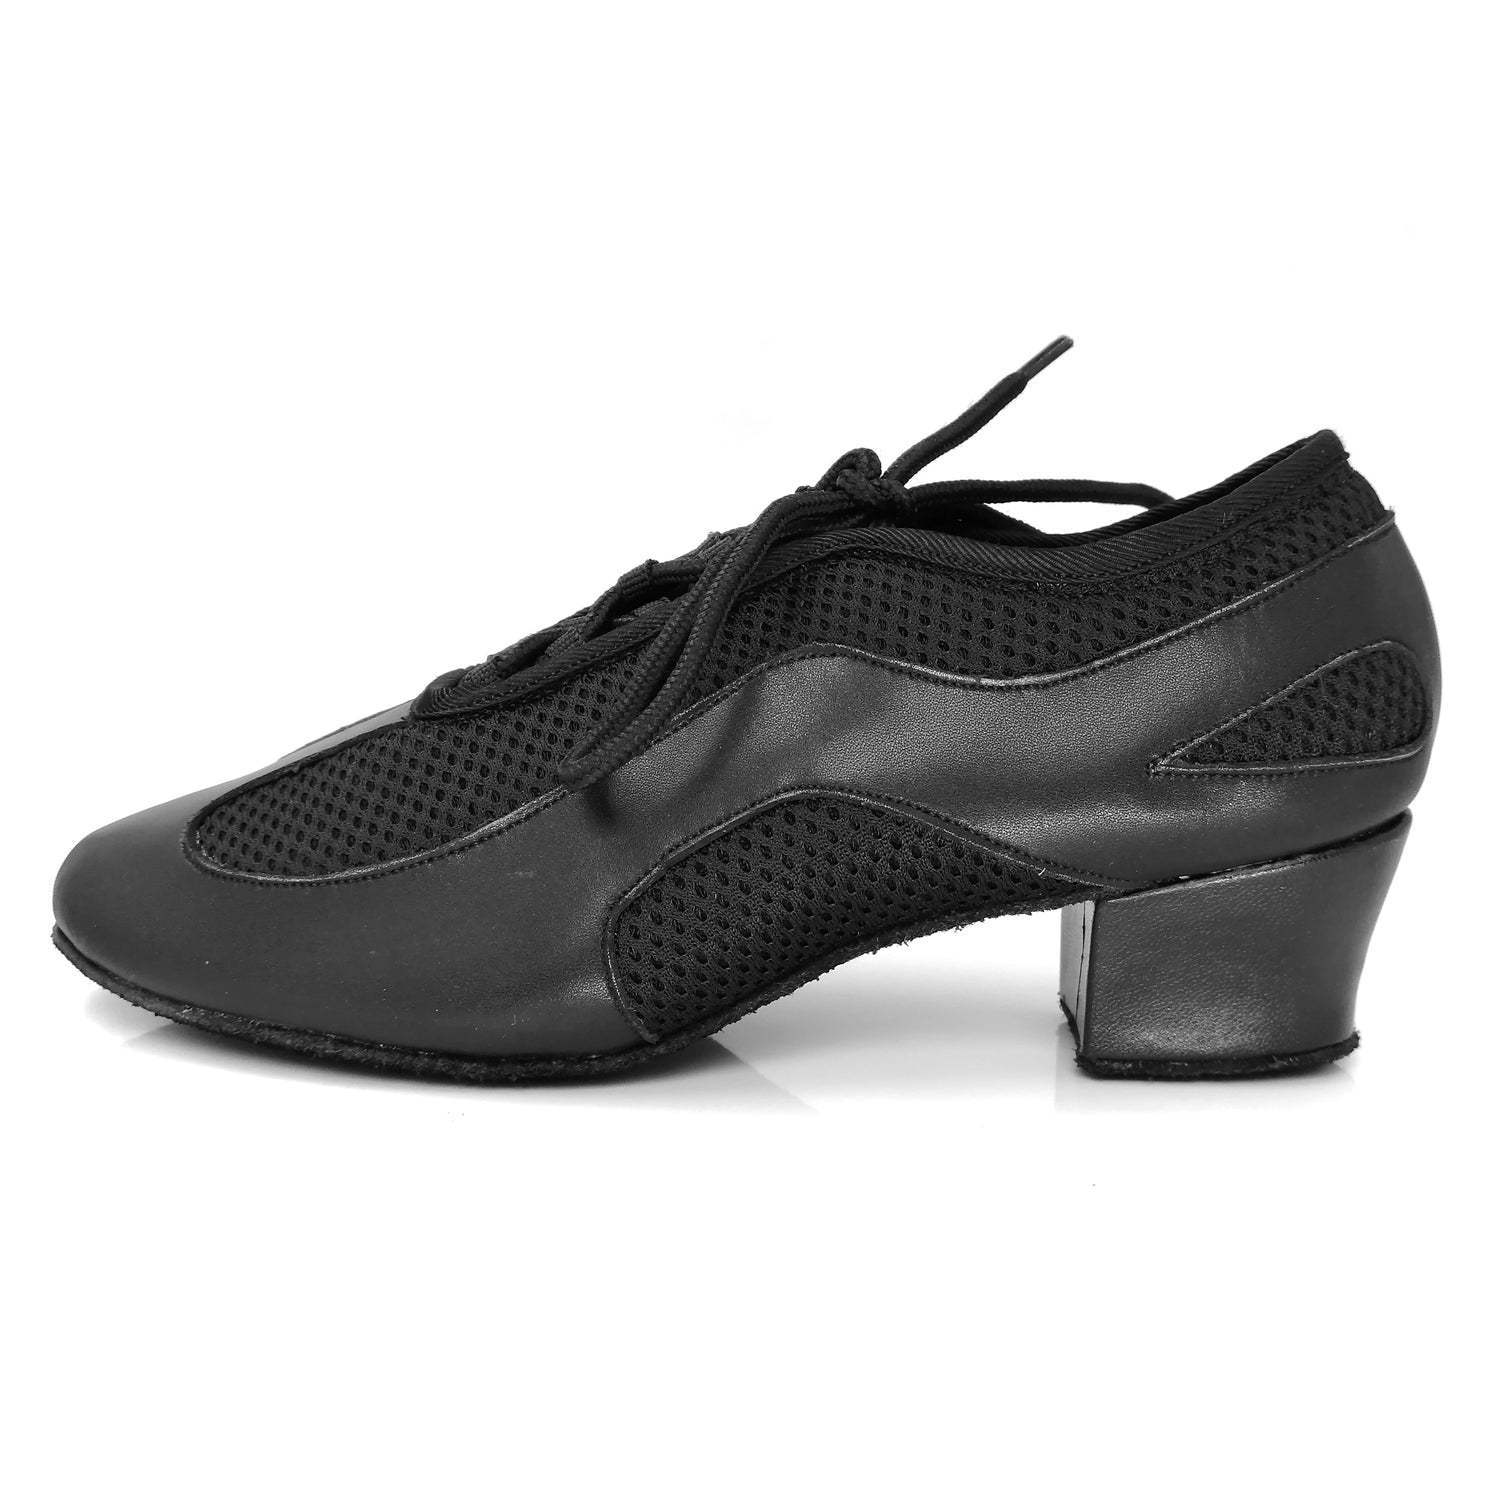 Women Ballroom Dancing Shoes with Suede Sole Lace-up Closed-toe for Tango Latin Practice PD5006A3